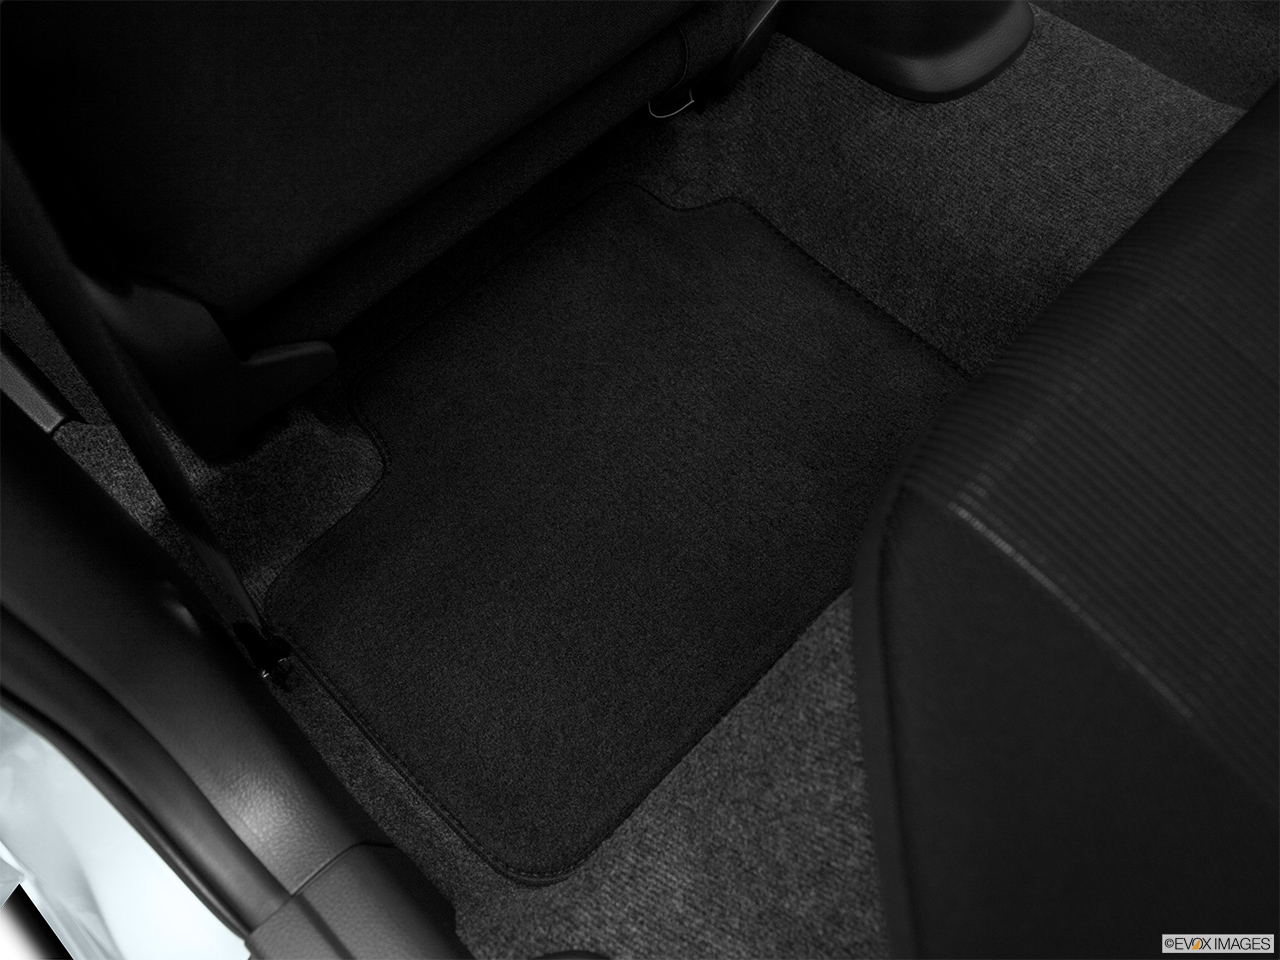 2011 Suzuki SX4 Sportback Technology Rear driver's side floor mat. Mid-seat level from outside looking in. 